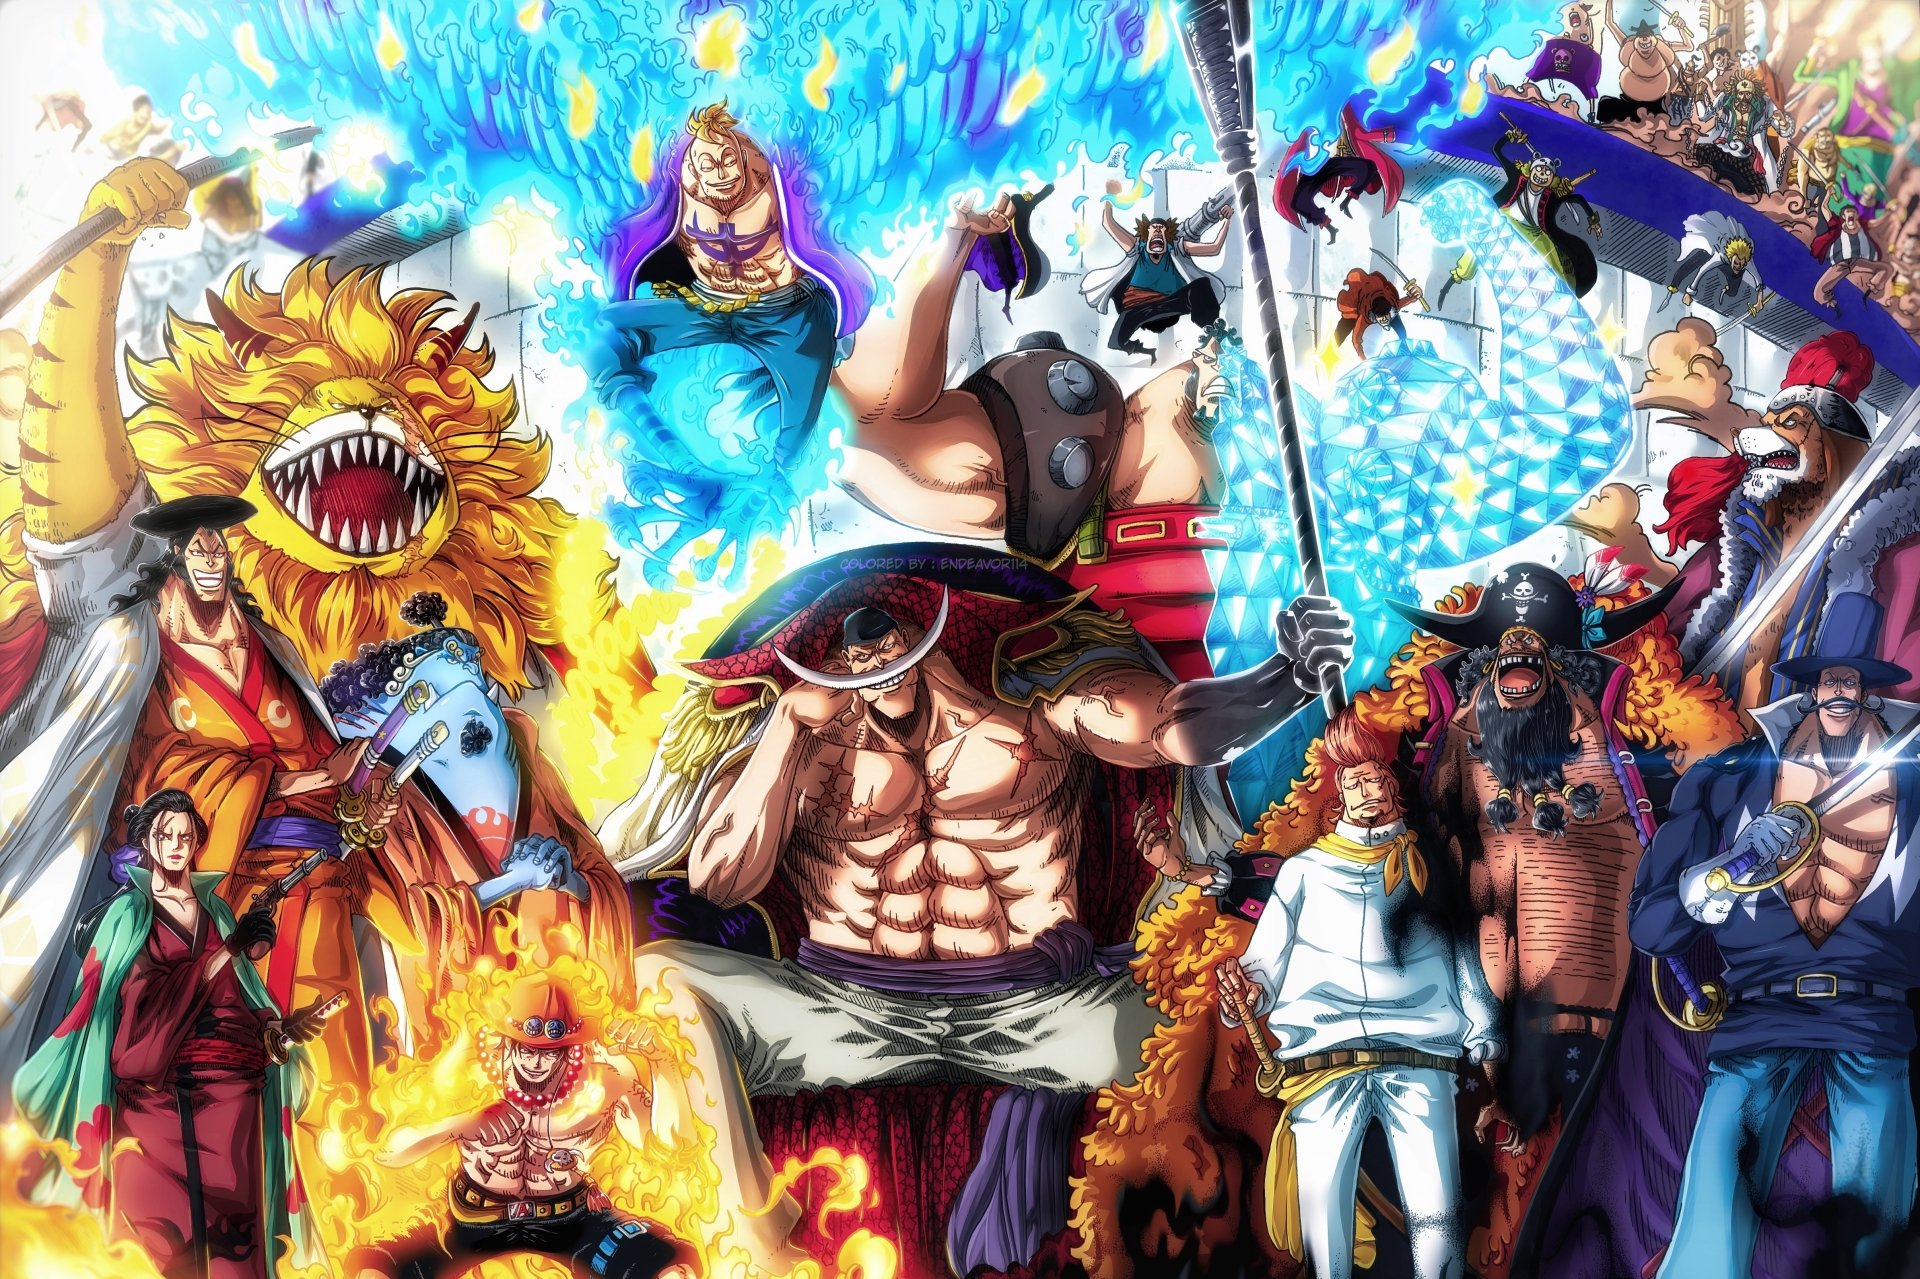 4828x3216 White Beard Crew by ENDEAVOR1 Wallpaper Background Image. 